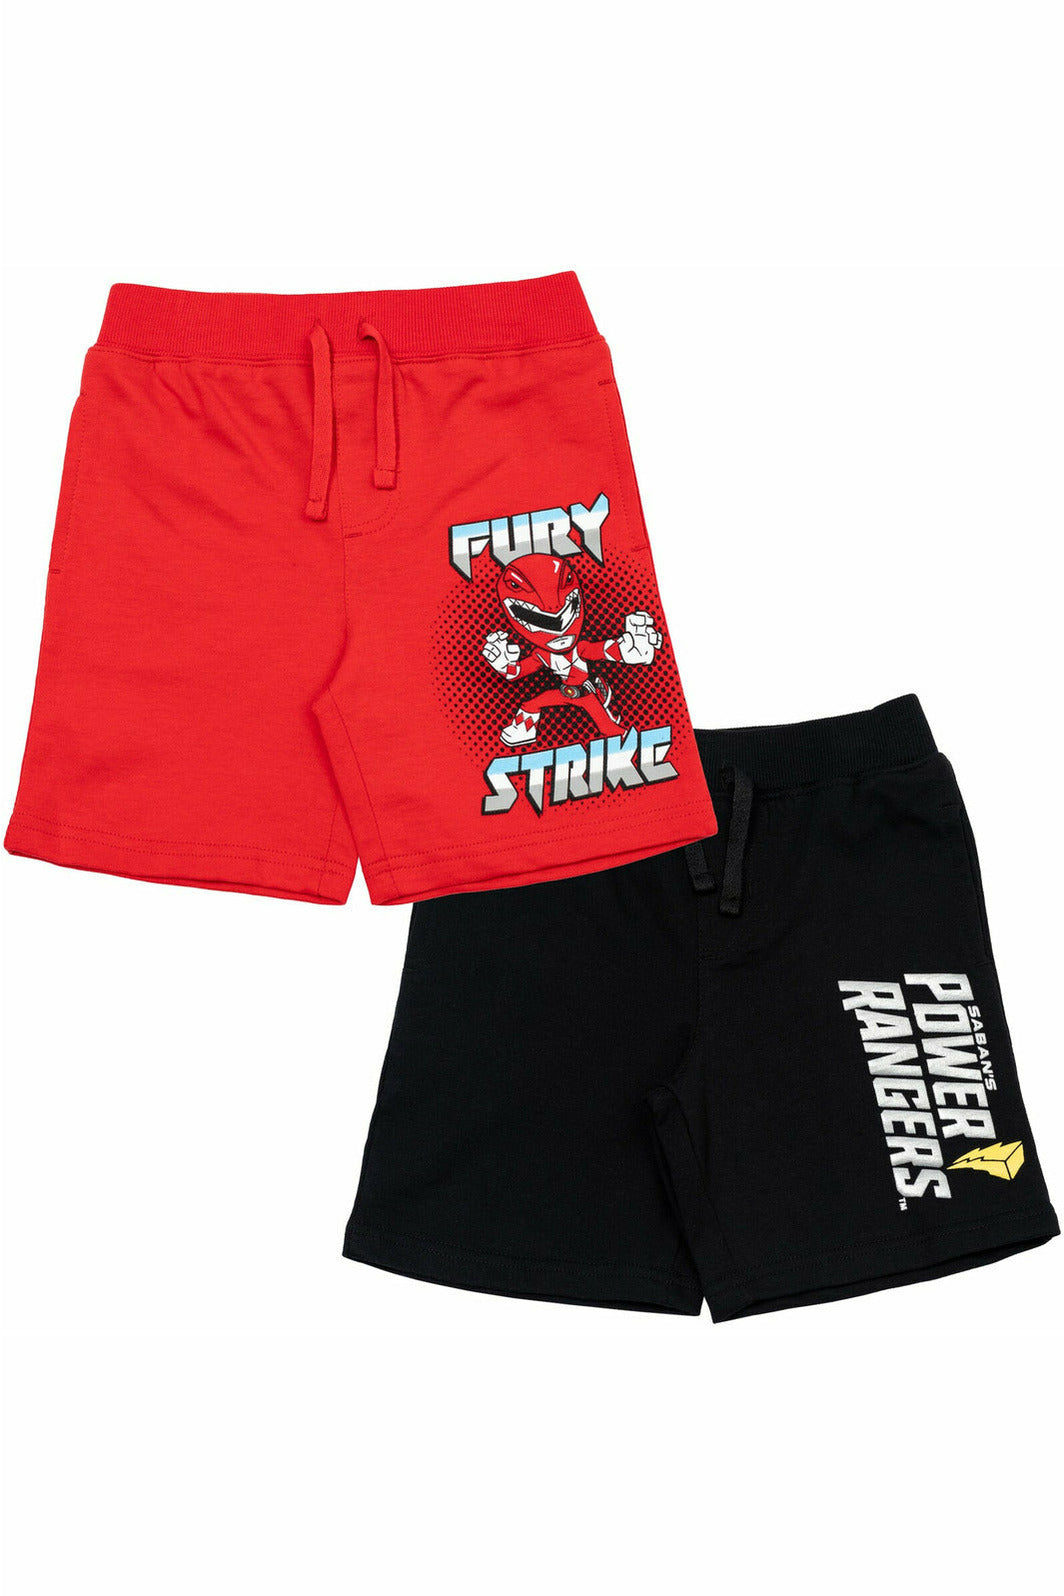 Power Rangers French Terry 2 Pack Fashion Shorts